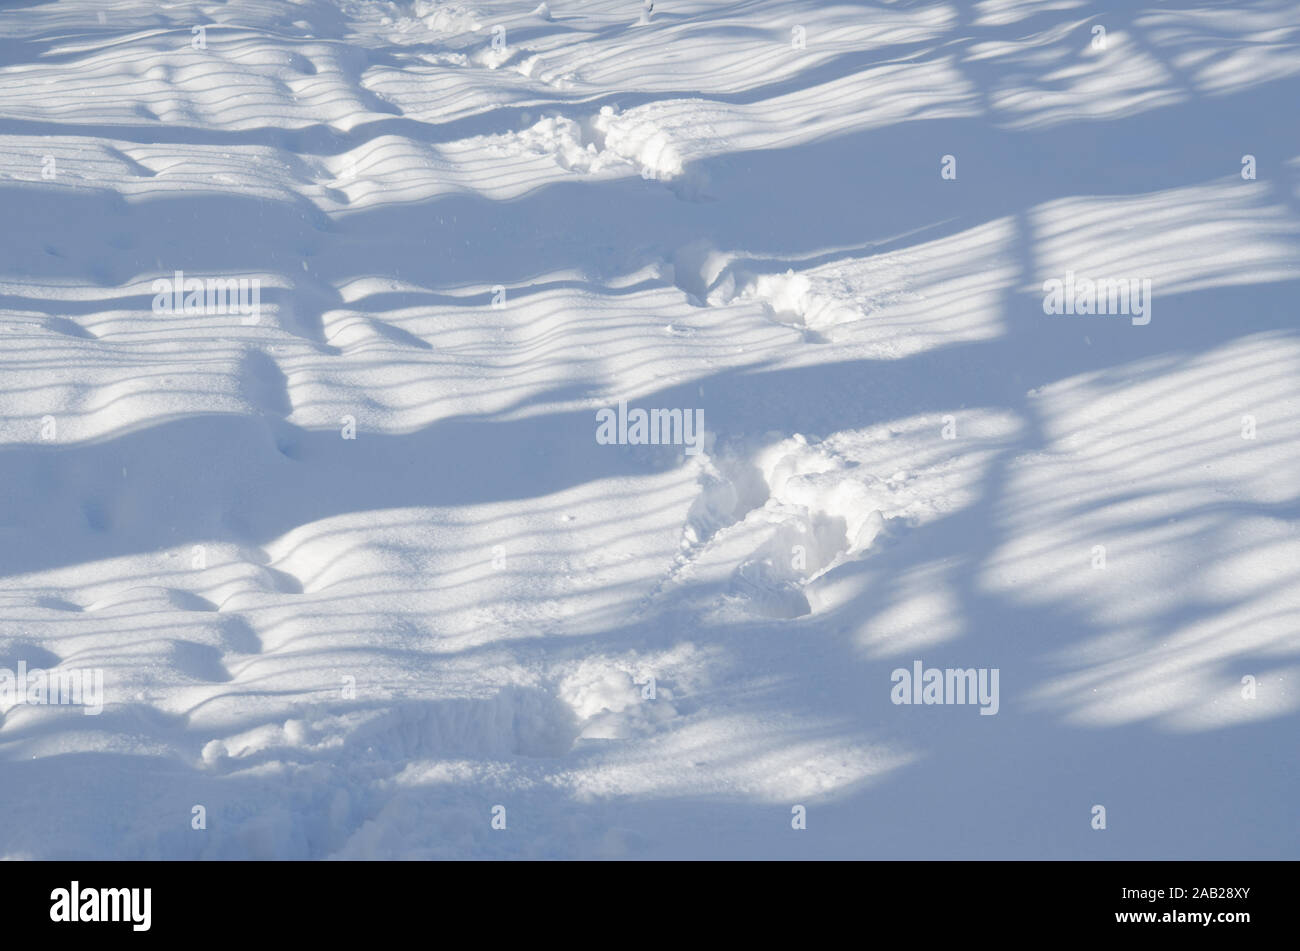 Traces and shadows on the snowdrift. Abstract winter landscape. Stock Photo